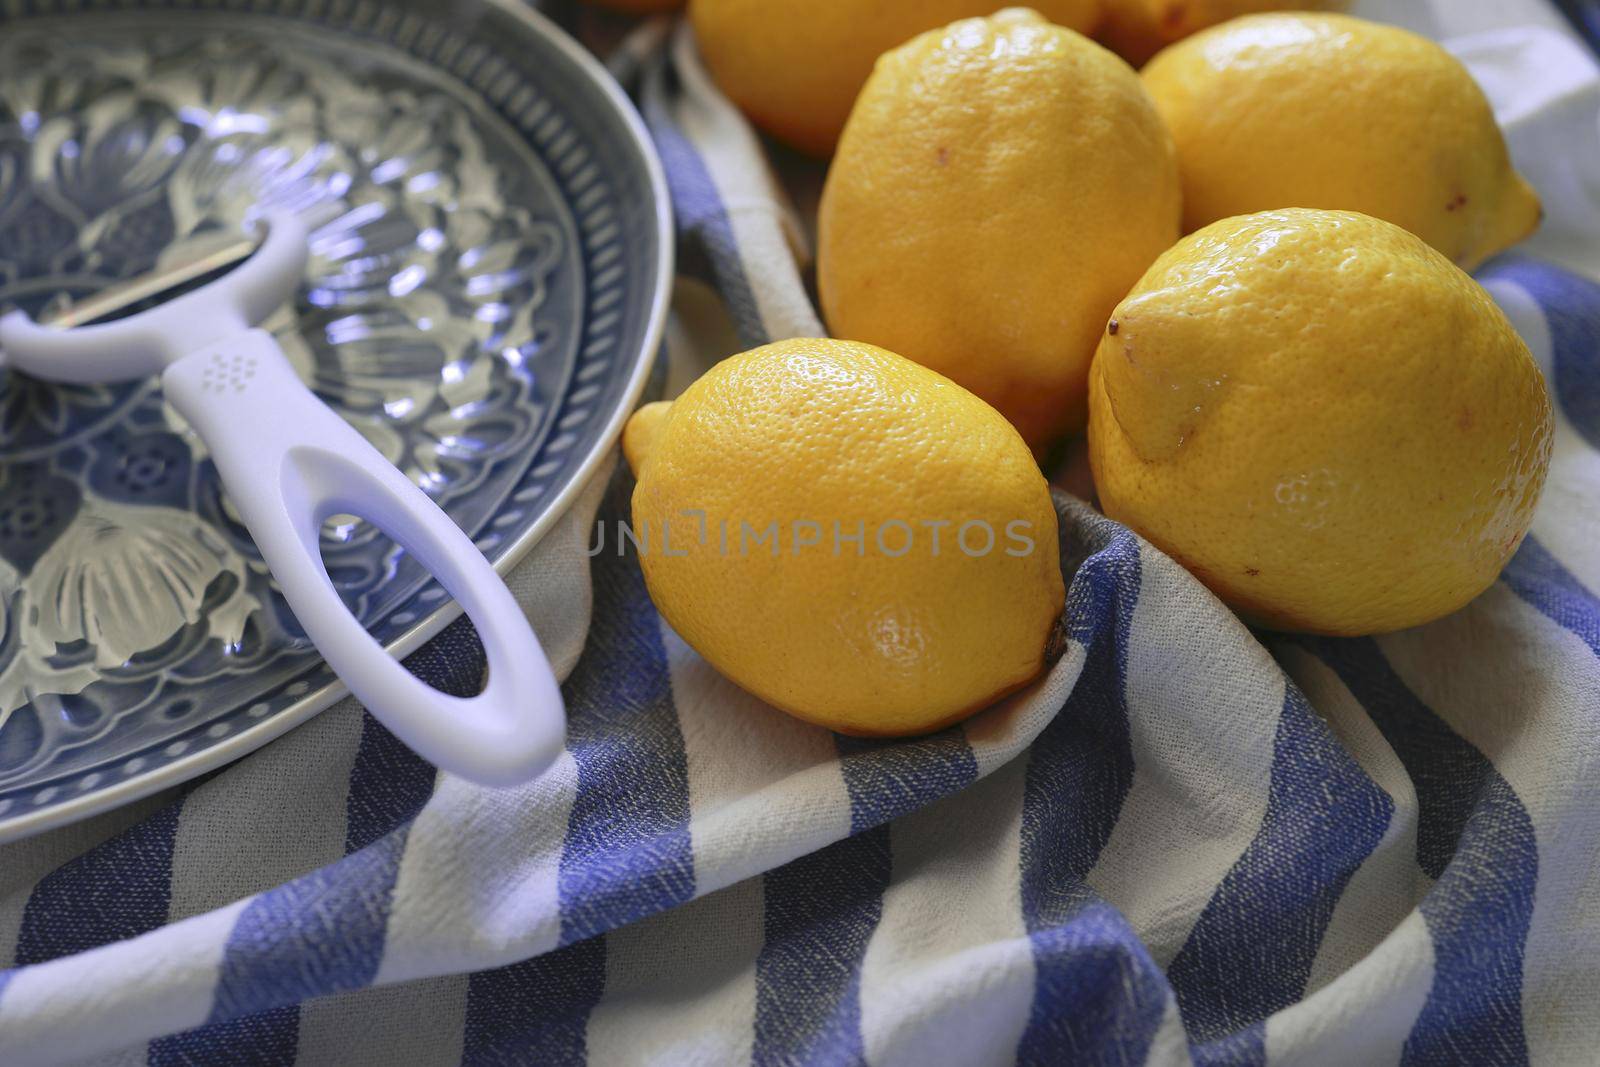 Lemon fruits and peeler for zest to make limoncello. Peeler, lemons and zest. Copy space, selected focus.